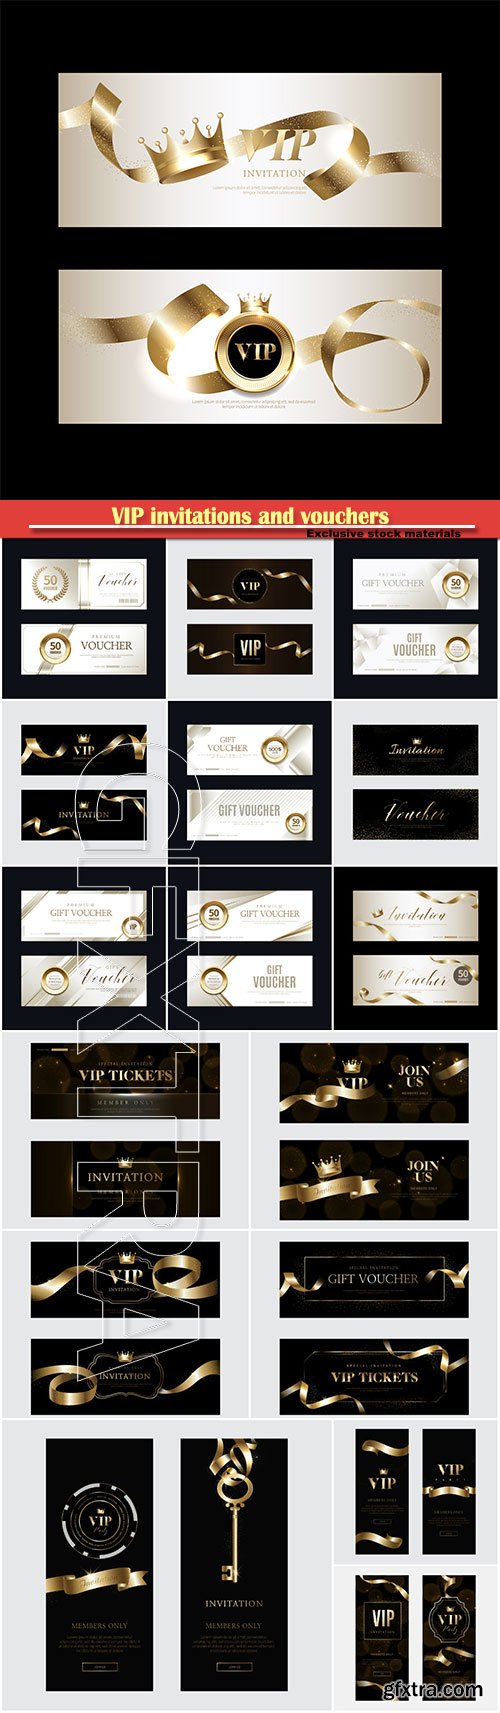 VIP invitations and vouchers with gold decor elements